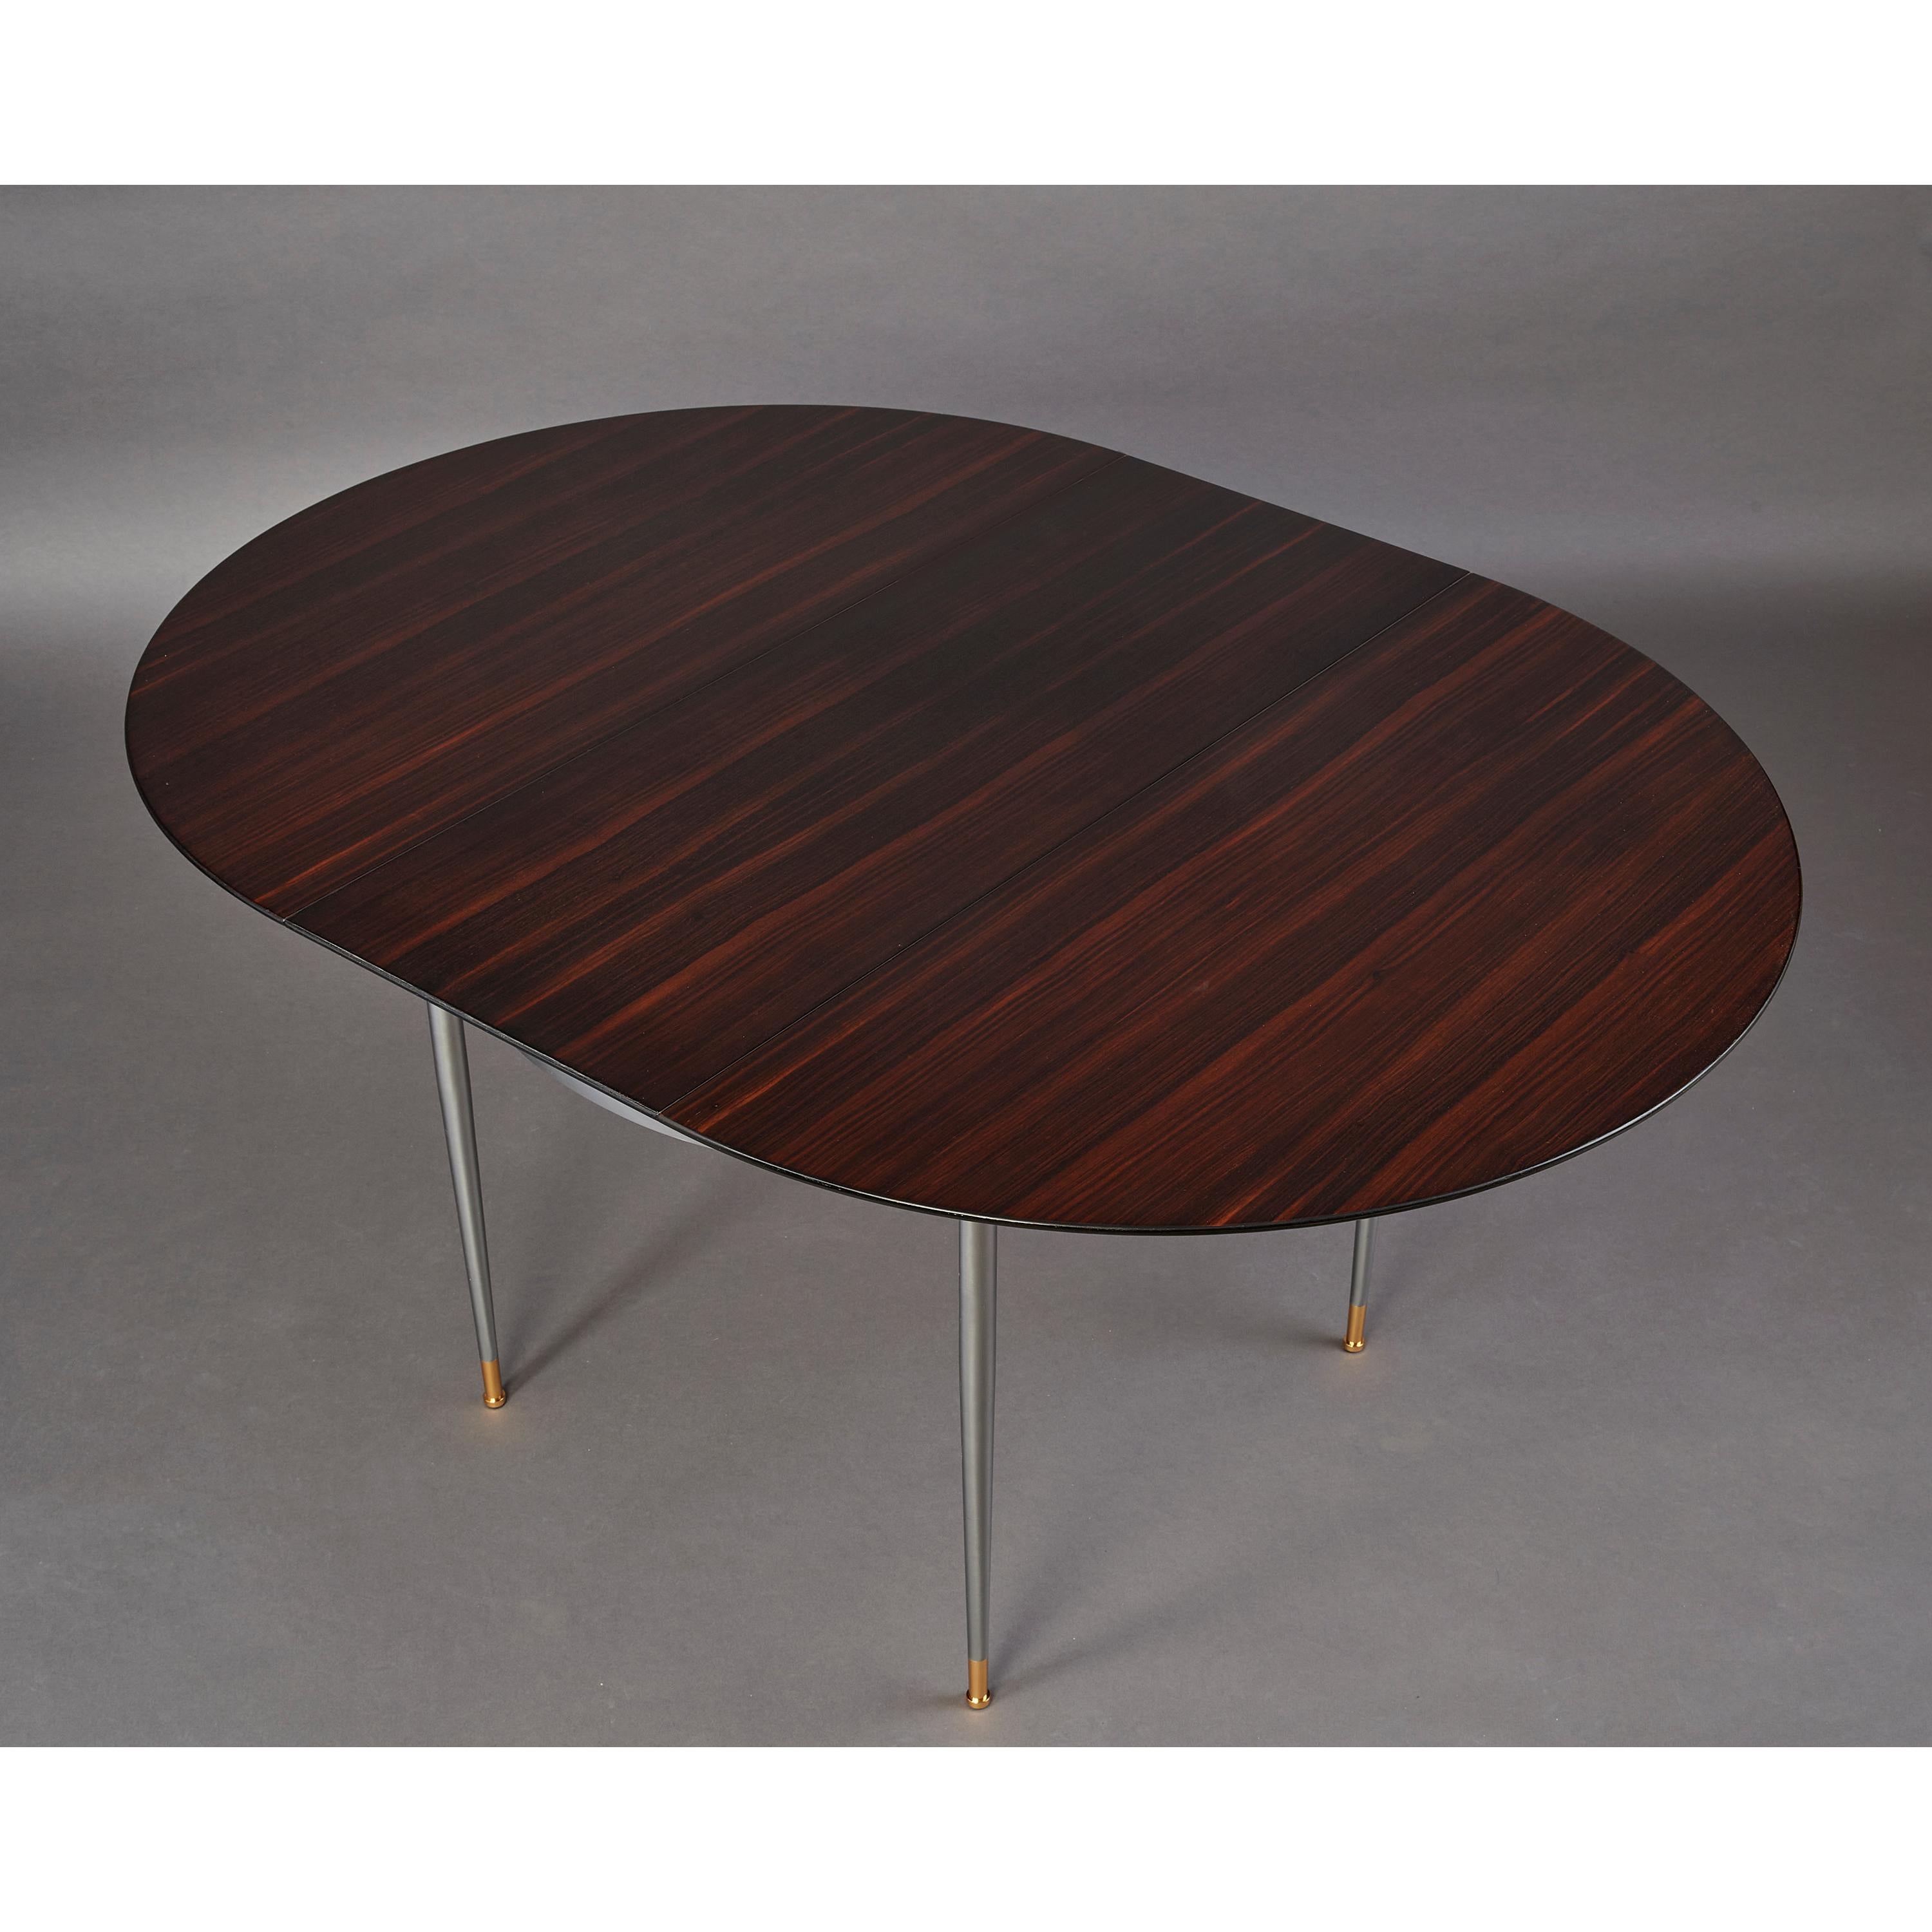 Polished Louis Sognot Exceptional Macassar Ebony Center or Dining Table, France, 1950s